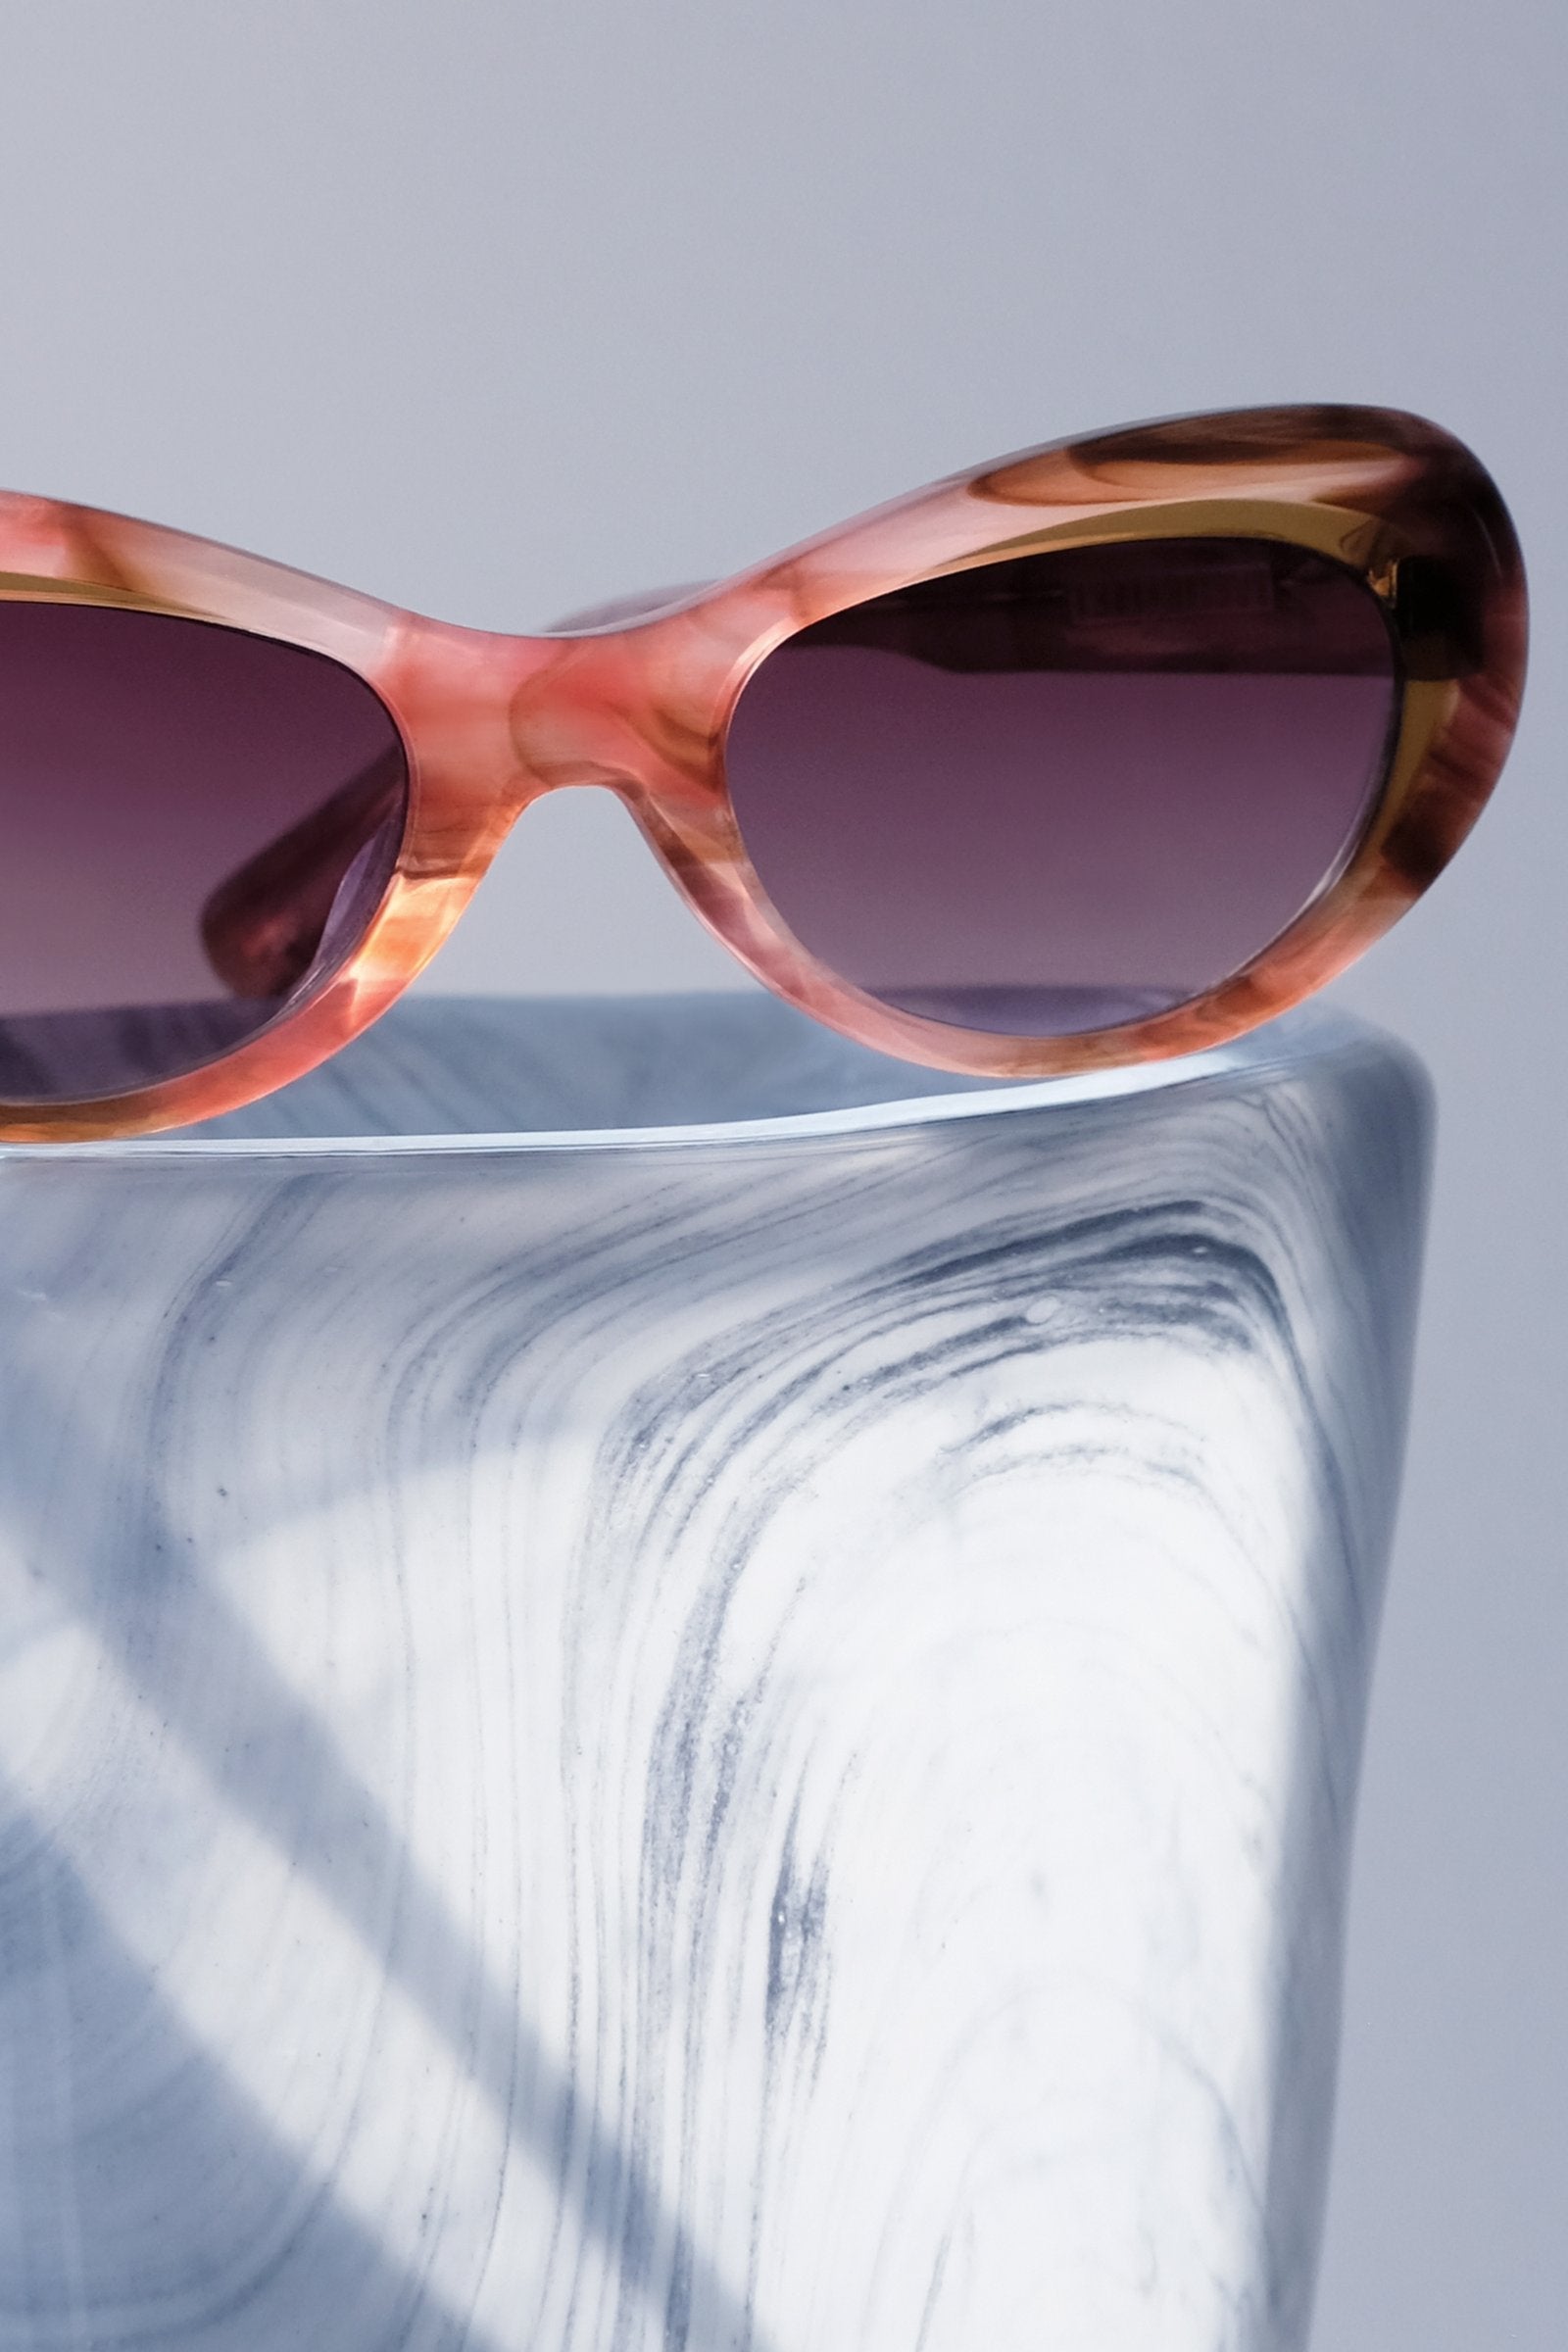 PINK AND CARAMEL BROWN ACCENTS CLASSIC CAT EYE SUNGLASSES, ROSE GOLD METAL DETAILS. MAROON LENS. ART DECO DESIGN, LIMITED EDITION. DESIGNER EYEWEAR, LUXURY SUNGLASSES. CELEBRITY SUNGLASSES. FEMALE ENTREPRENEUR